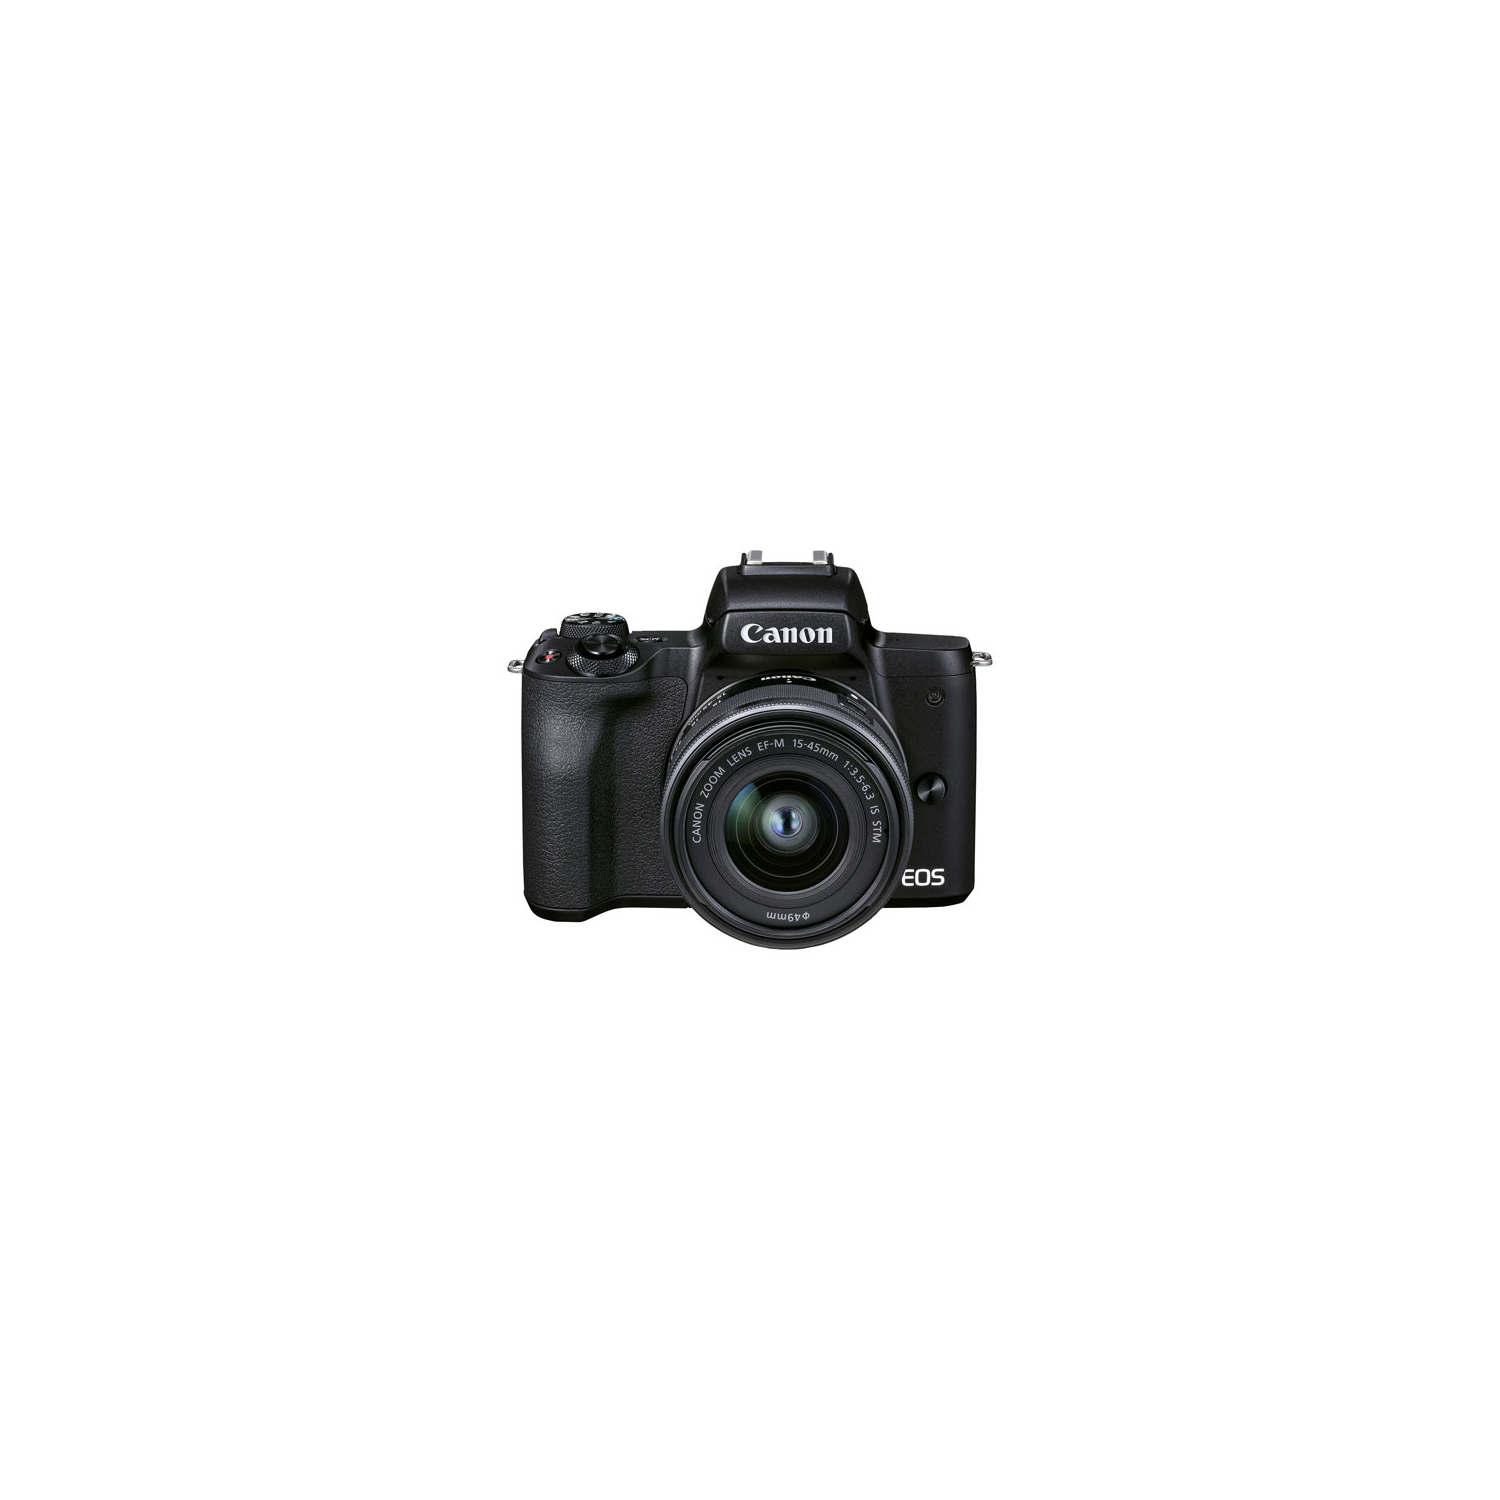 Refurbished (Excellent) - Canon EOS M50 Mark II Mirrorless Camera with 15-45mm IS STM Lens Kit